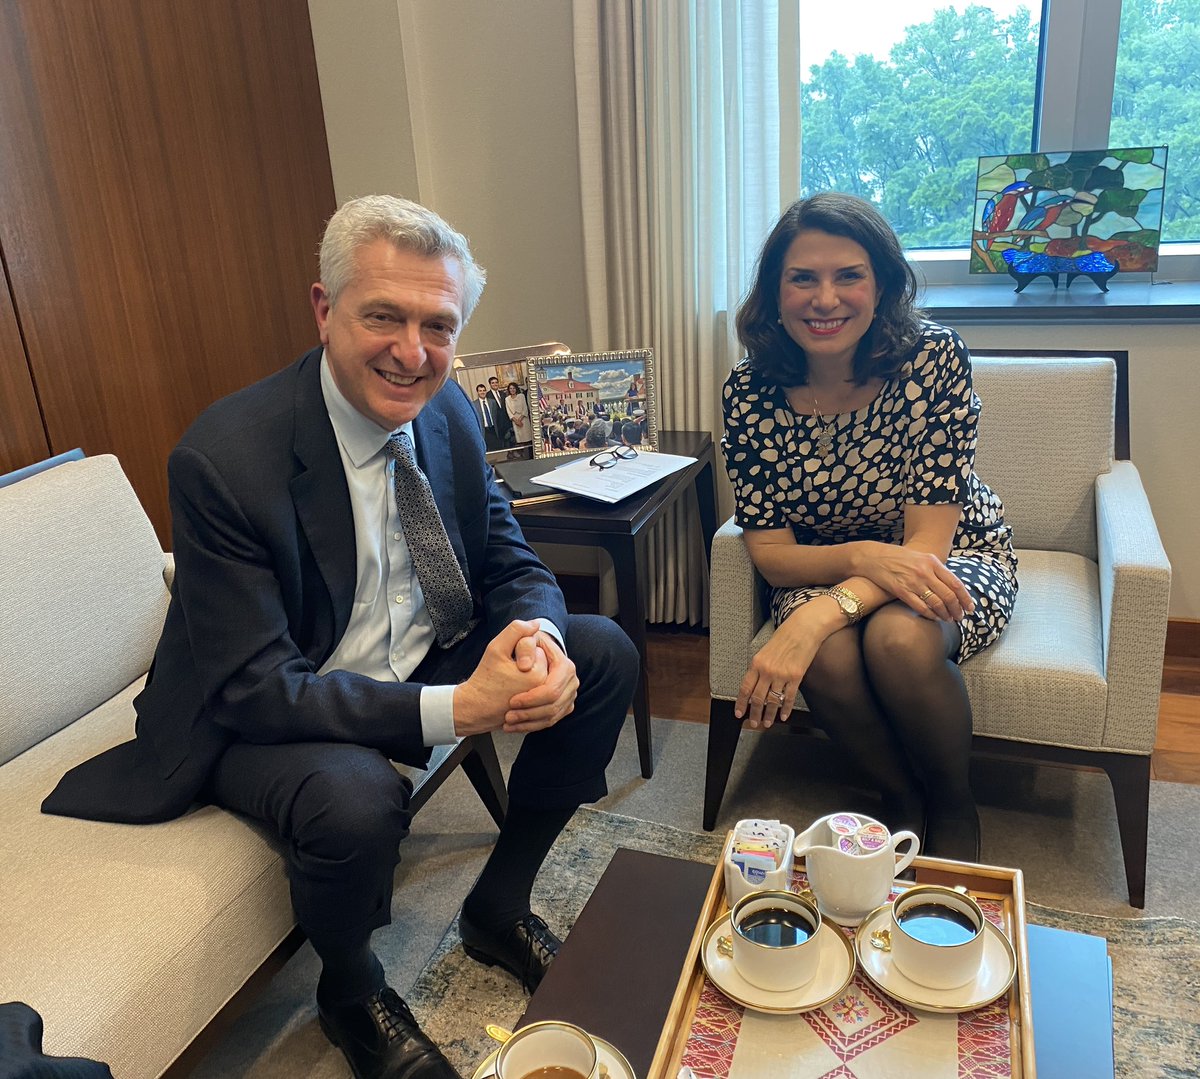 Happy to meet a second time this week with my friend @refugees High Commissioner @FilippoGrandi. We discussed situations in Burma, the Middle East, Sudan, Ukraine, and beyond, and @StatePRM and UNHCR collaboration in the face of growing humanitarian needs.